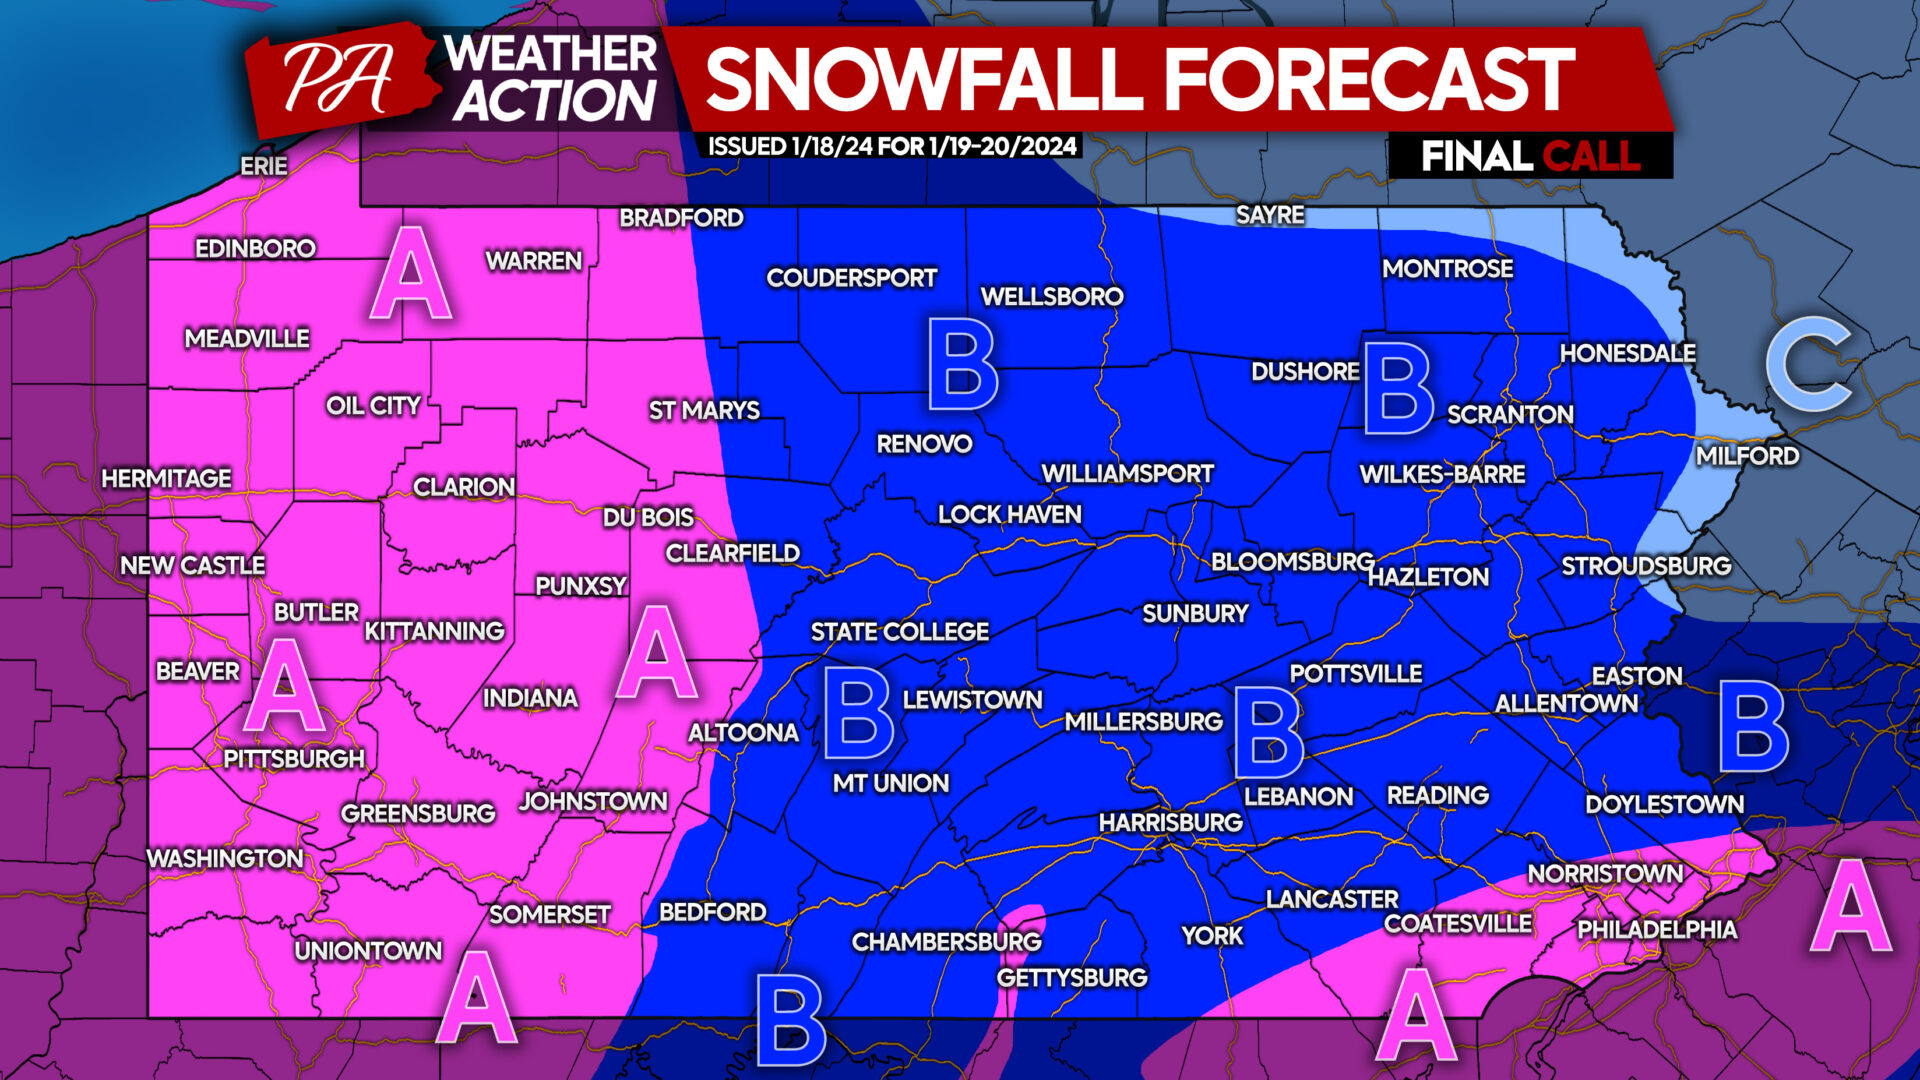 FINAL Call Snowfall Forecast for Friday’s Snowstorm in Pennsylvania